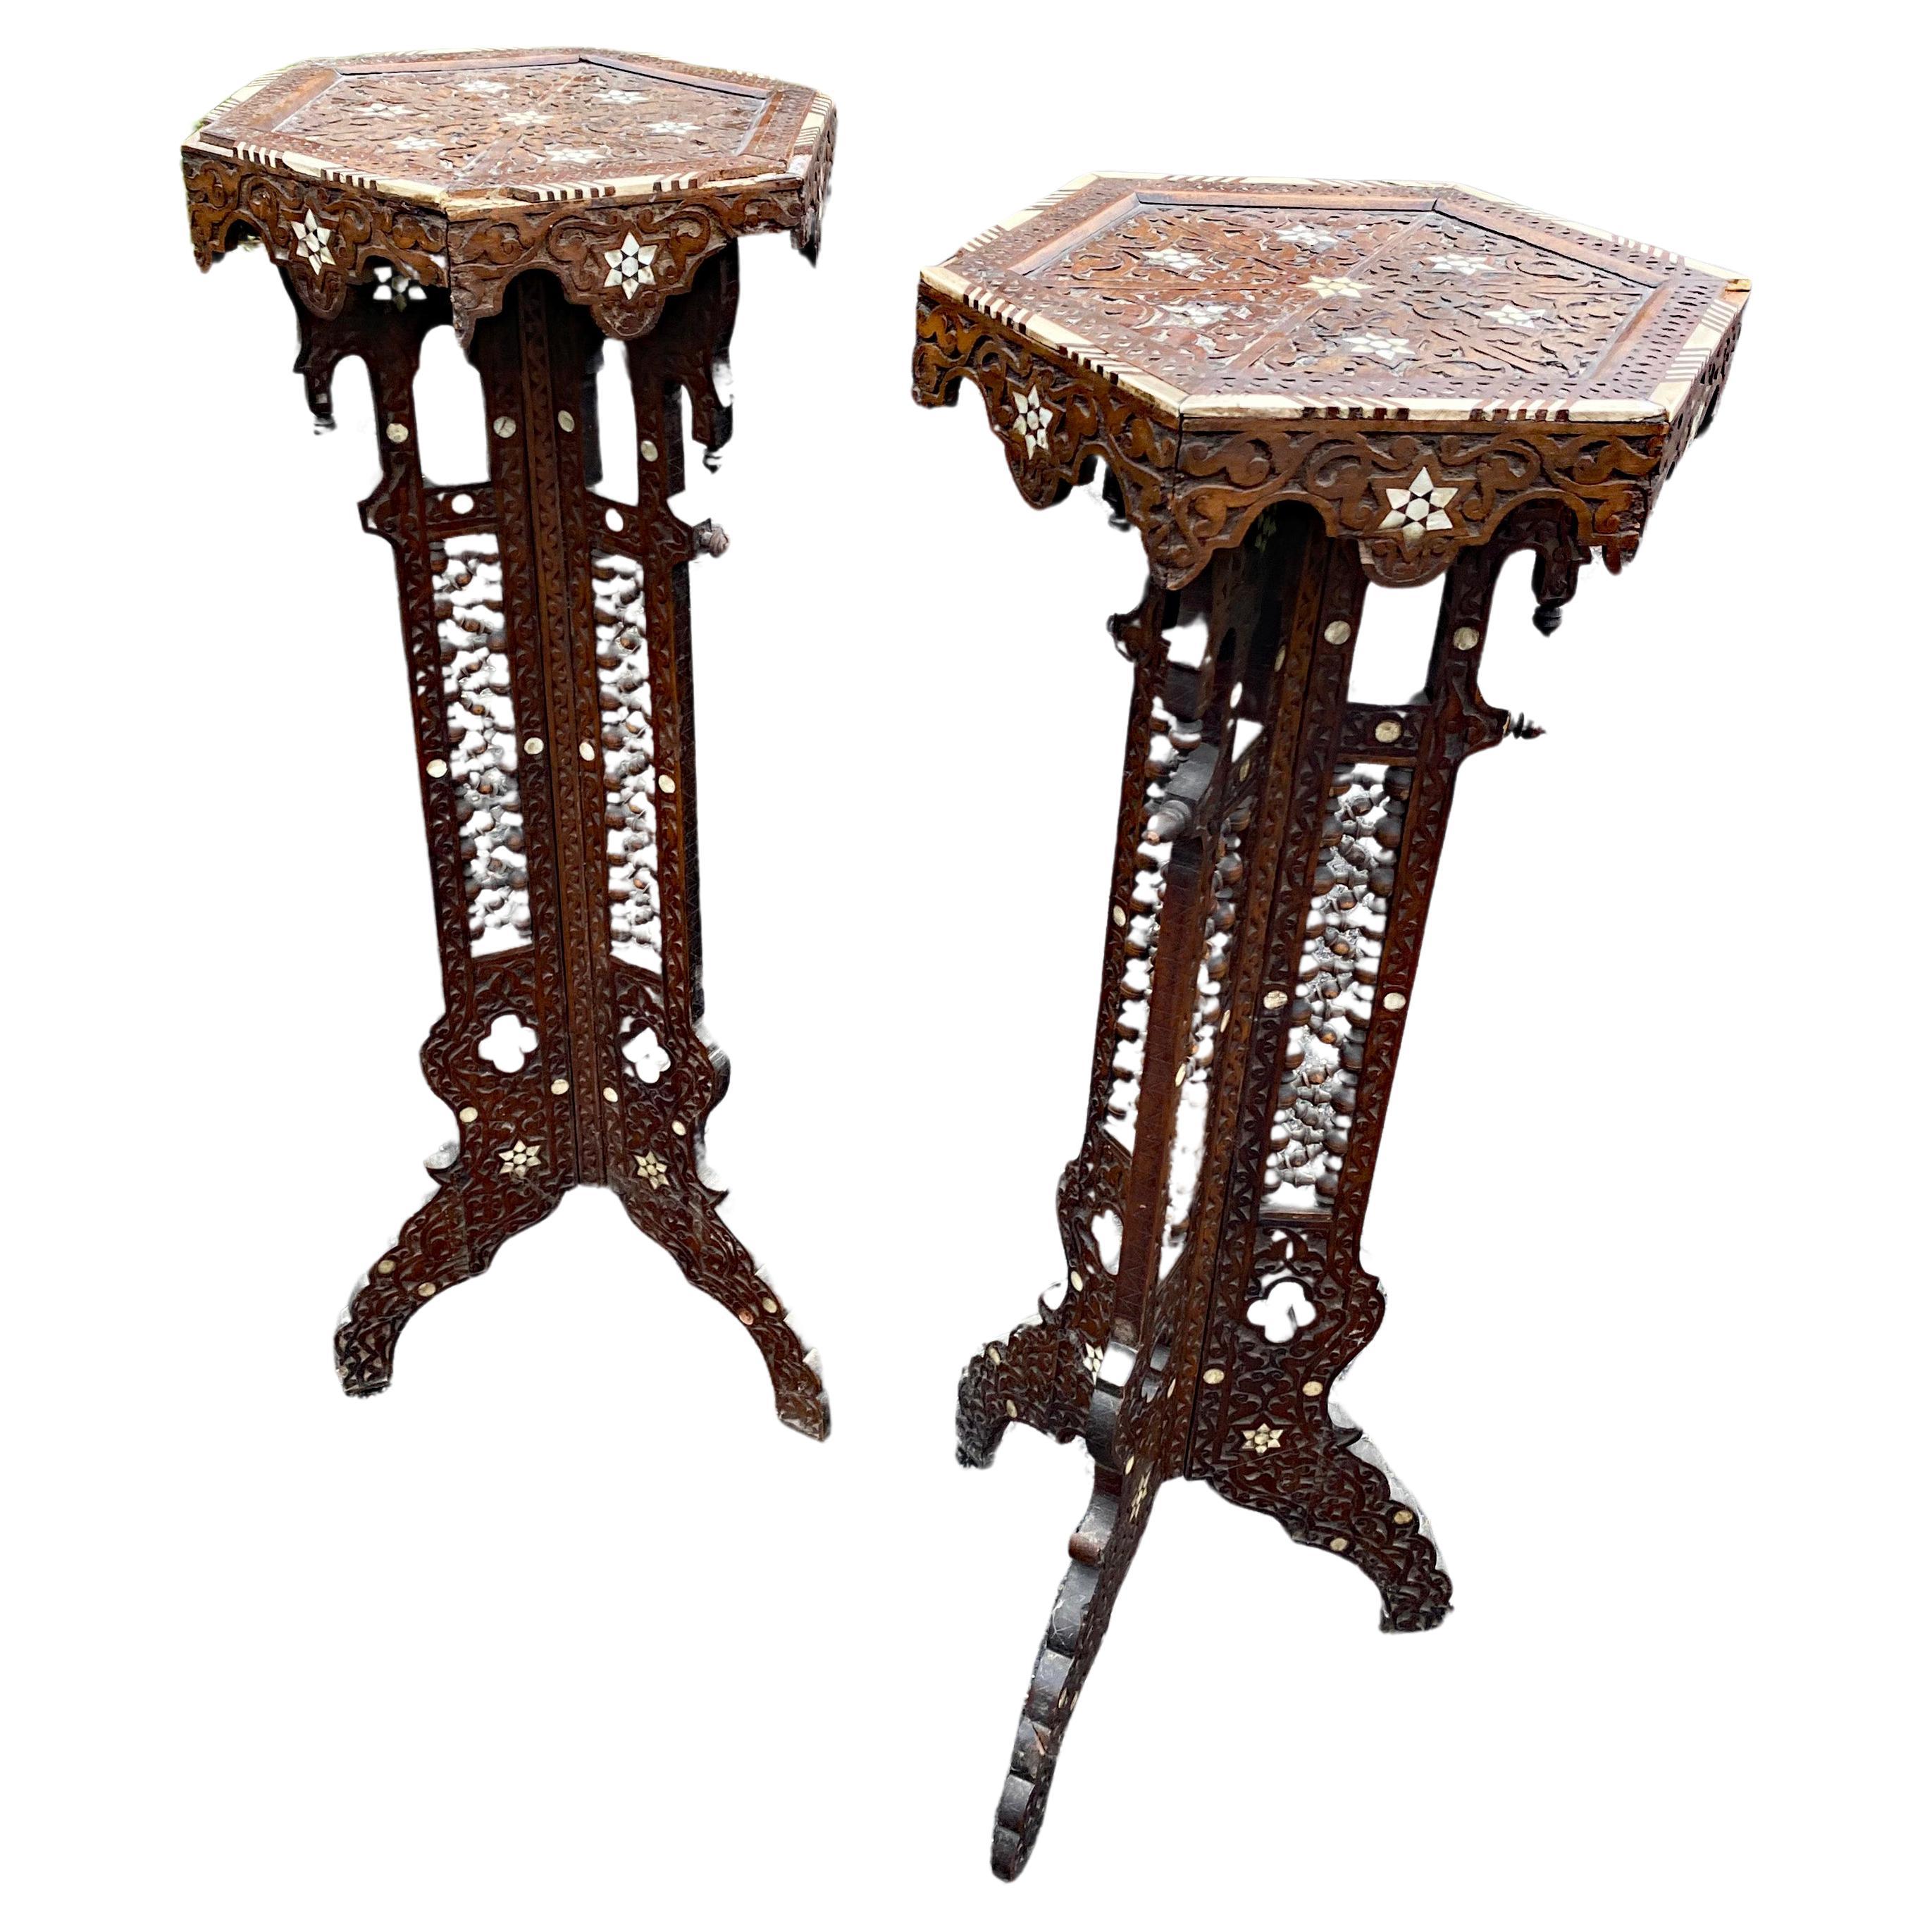 ancient oriental work, pair of carved wooden pedestals, bone and mother-of-pearl